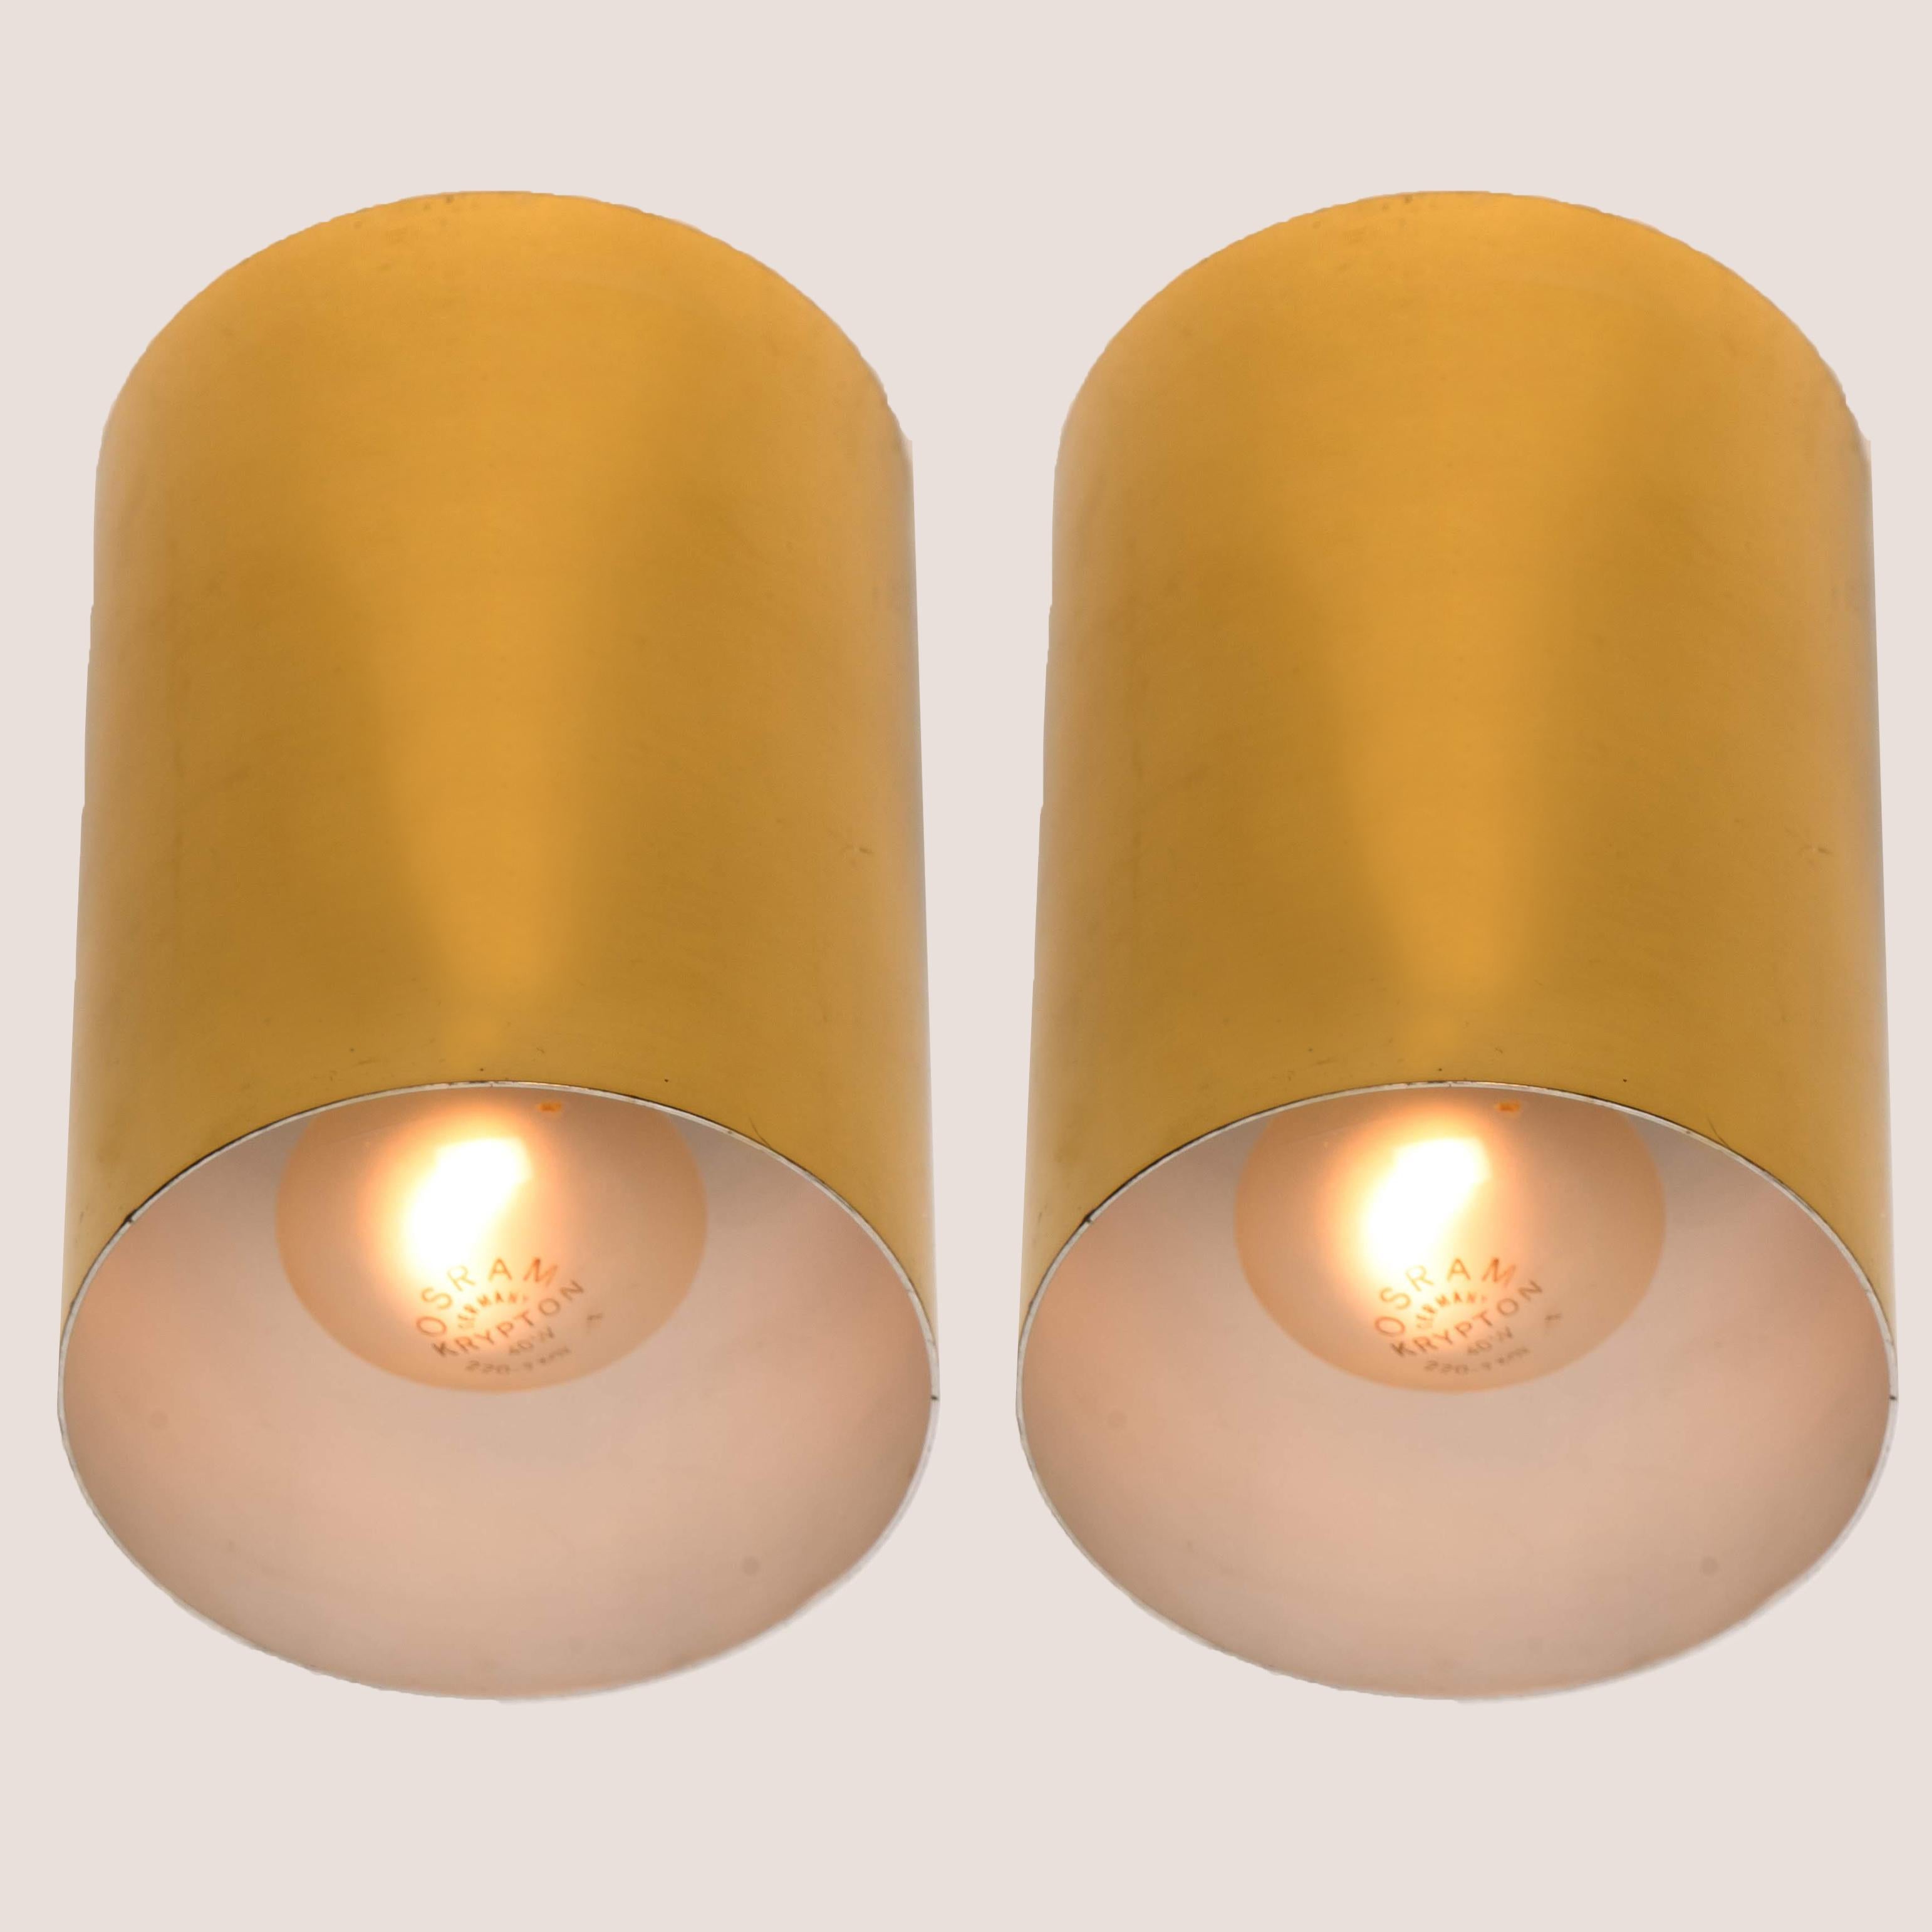 A pair of Hillebrand cube sconces in the style of Nanda Vigo, 1970s, Italy.
Quality brass frame in an elegant warm gold color, 

The light will bring a touch of intimacy. Suitable for a staircase, kitchen, hall or bedroom.
Heavy quality, in good